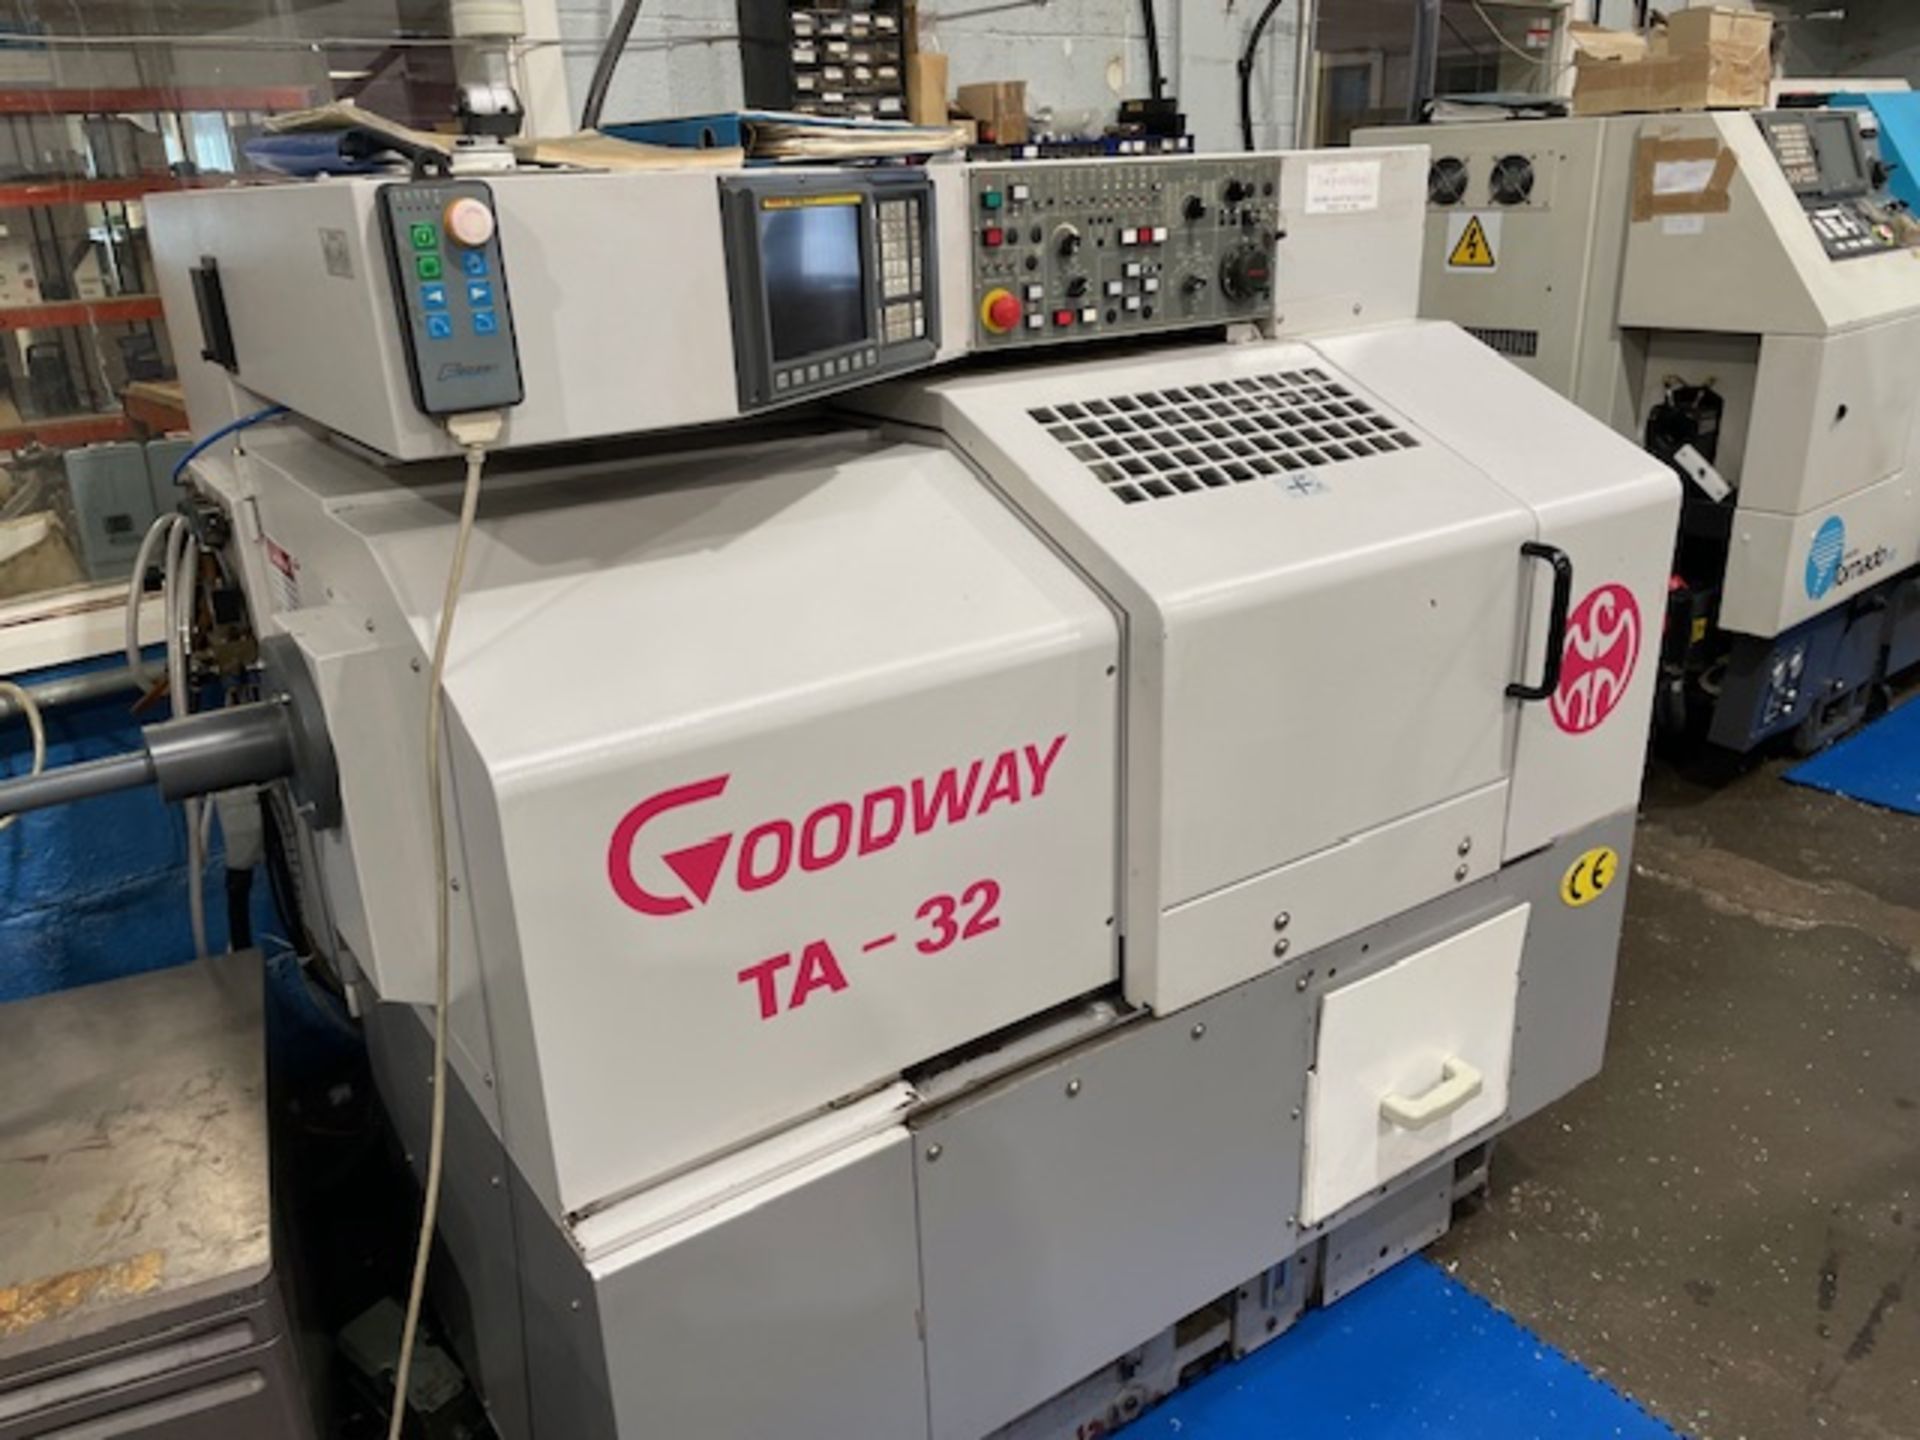 Goodway TA-32 CNC Lathe (2002) Serial Number 81692 with Goodway BF-654 Bar Feed (Location: Earls - Bild 4 aus 10